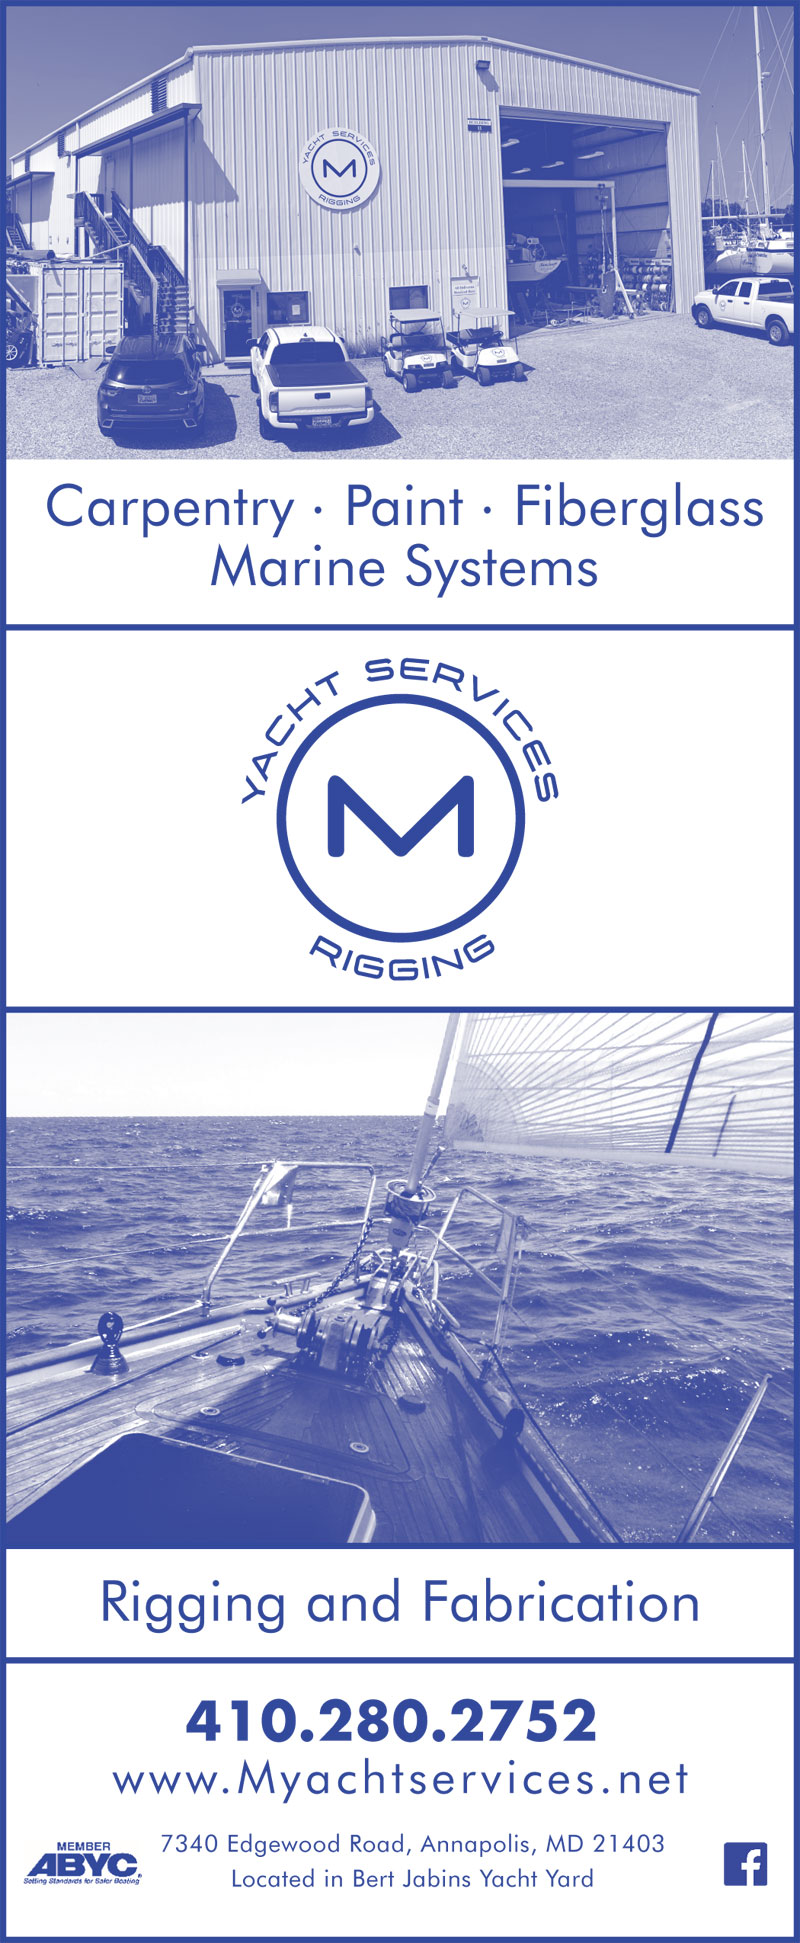 M Yacht Services and Rigging